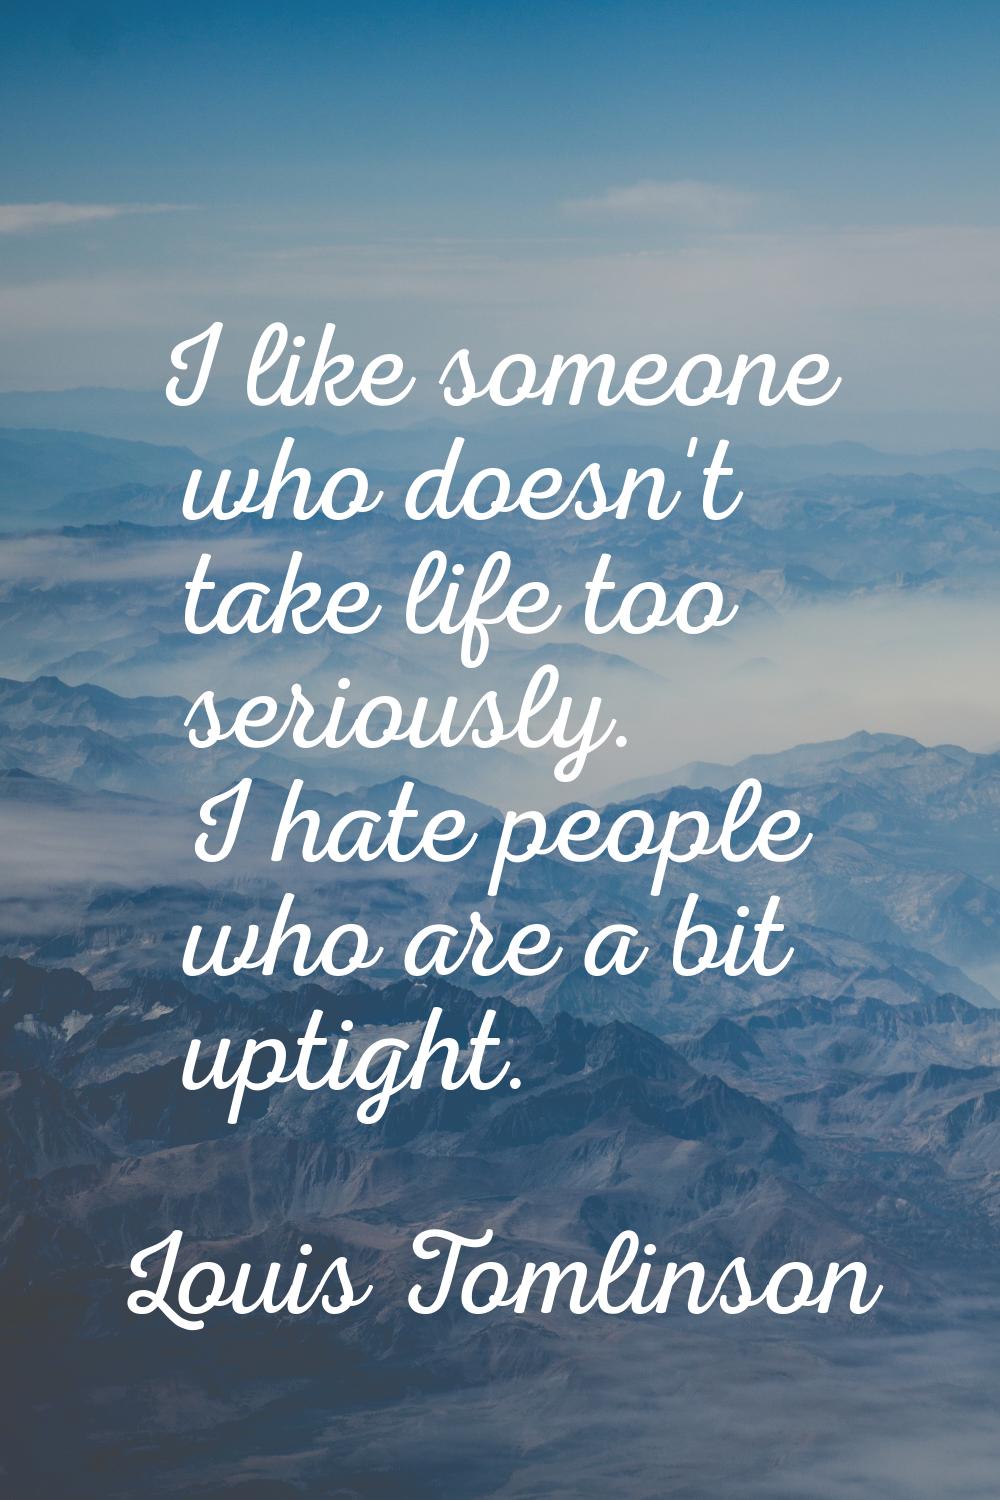 I like someone who doesn't take life too seriously. I hate people who are a bit uptight.